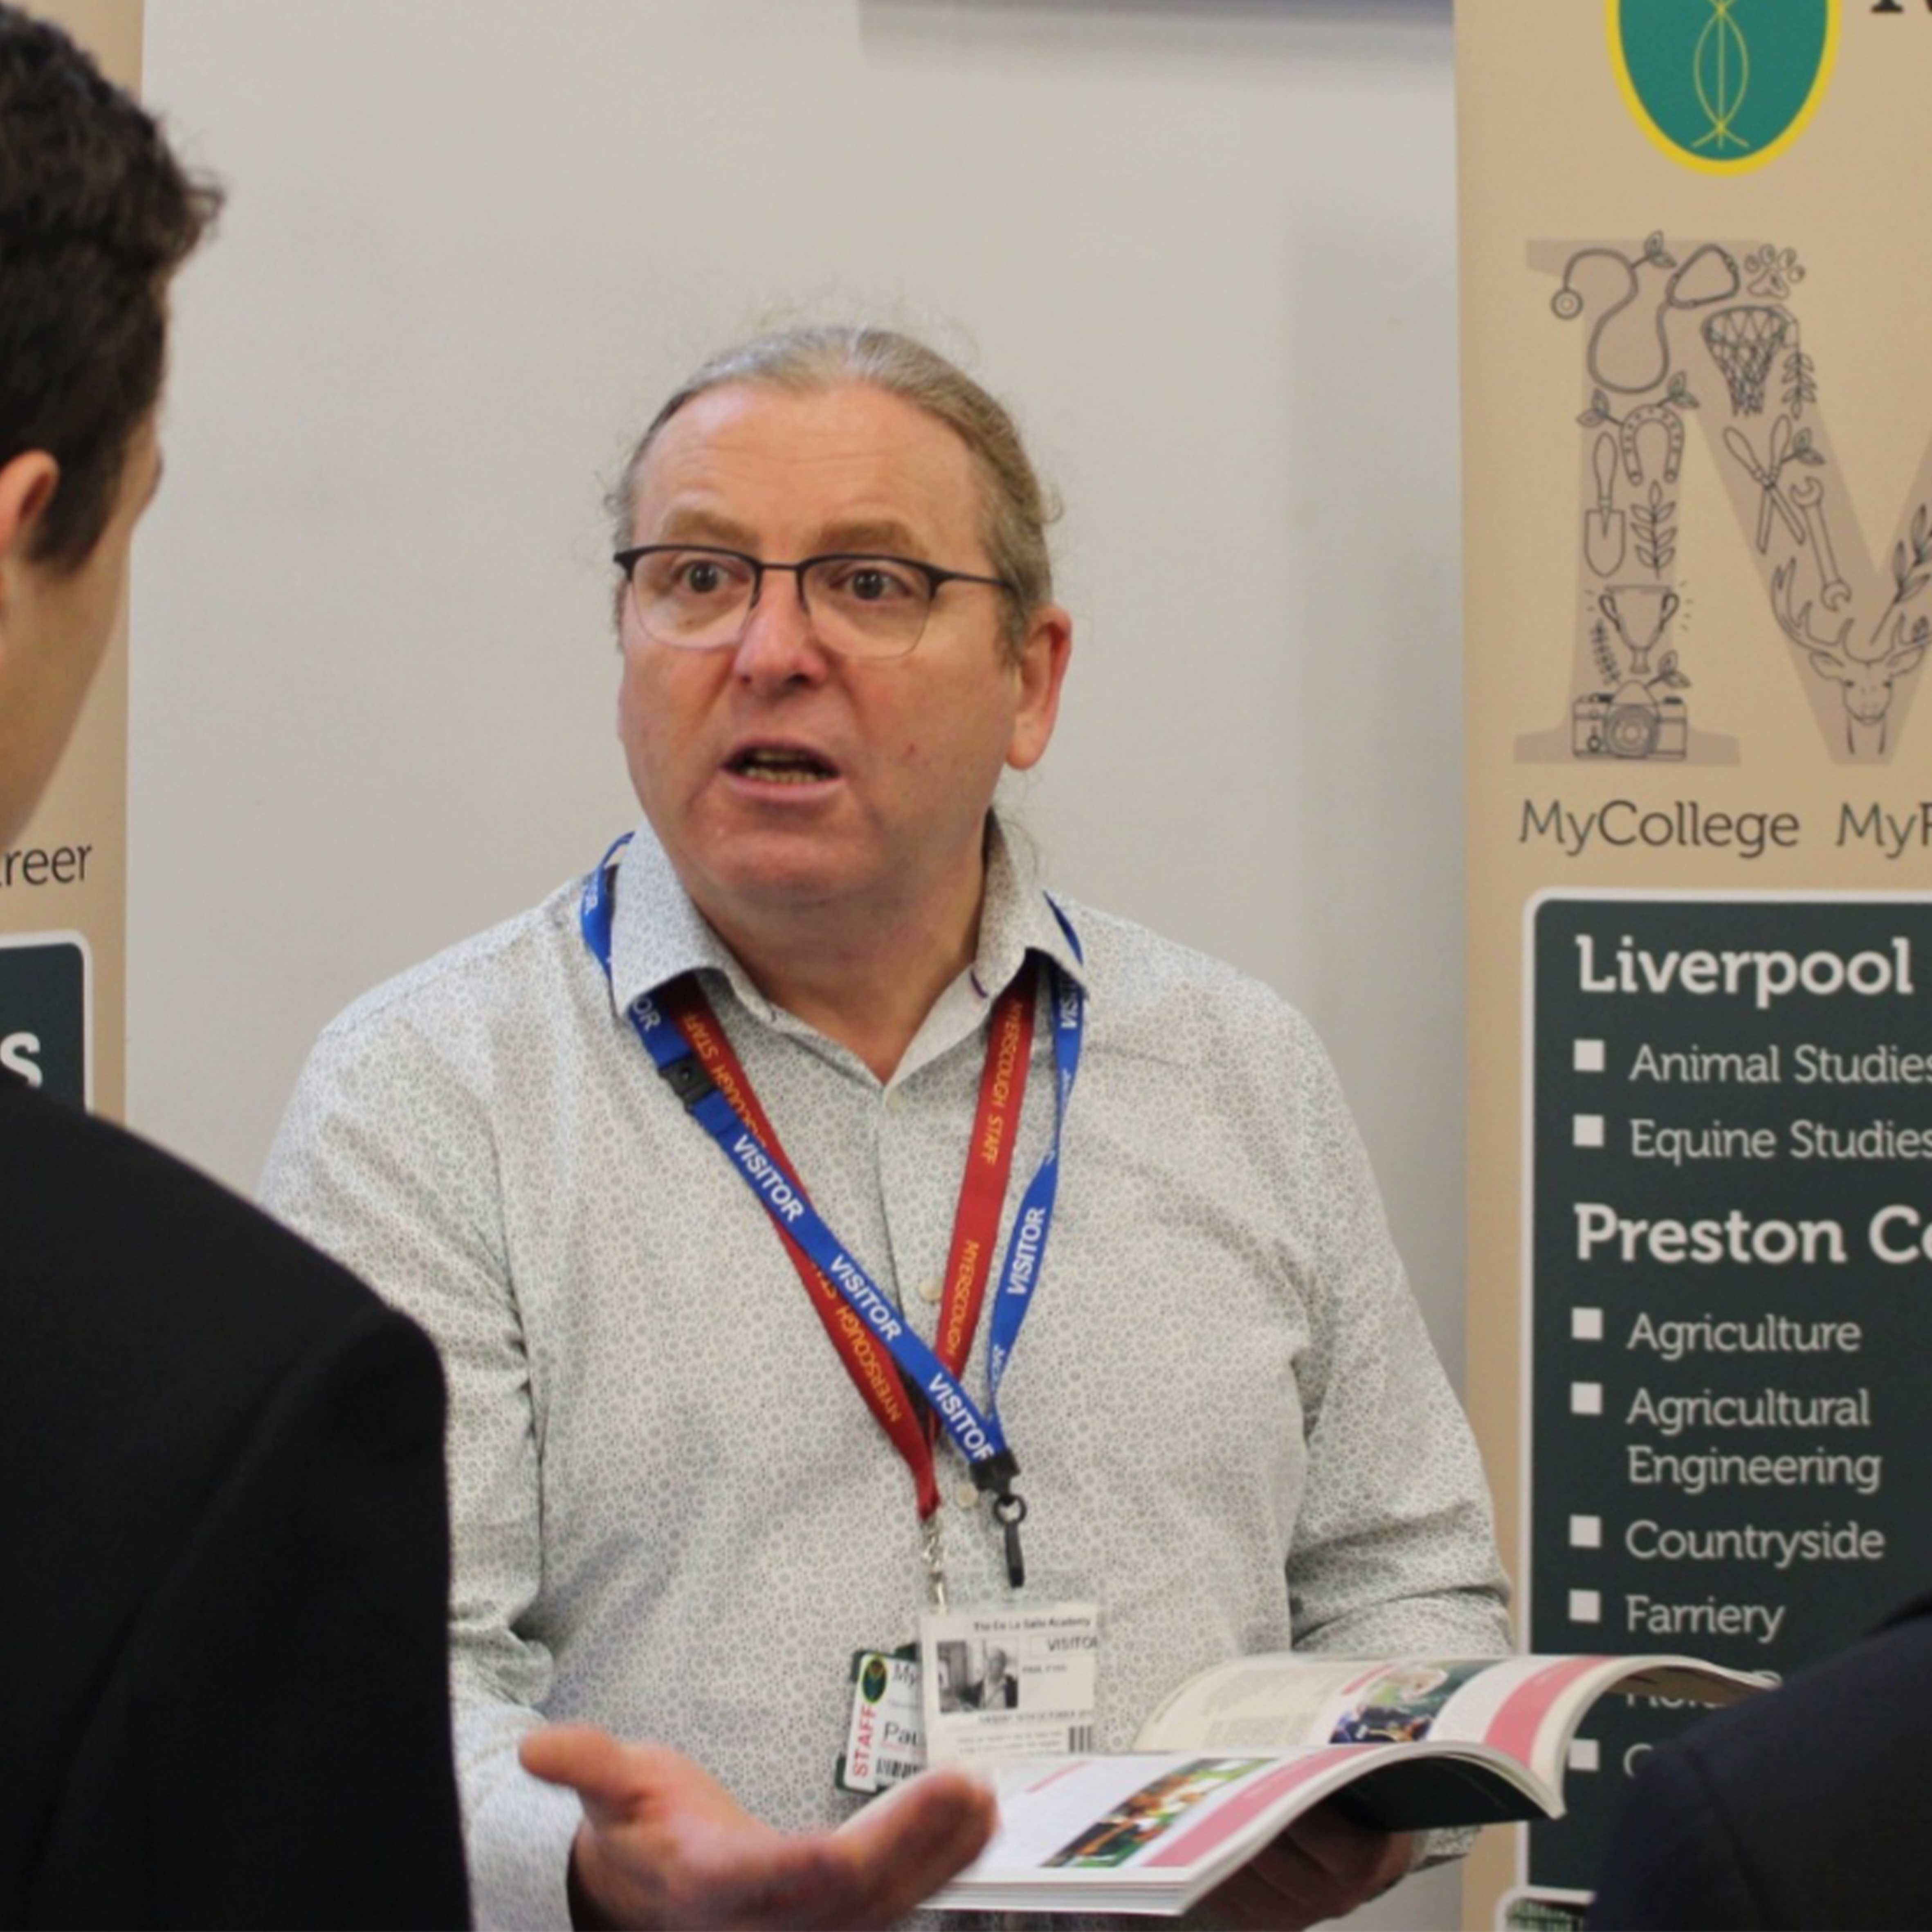 Myerscough Schools Coordinator offering course advice to a young person